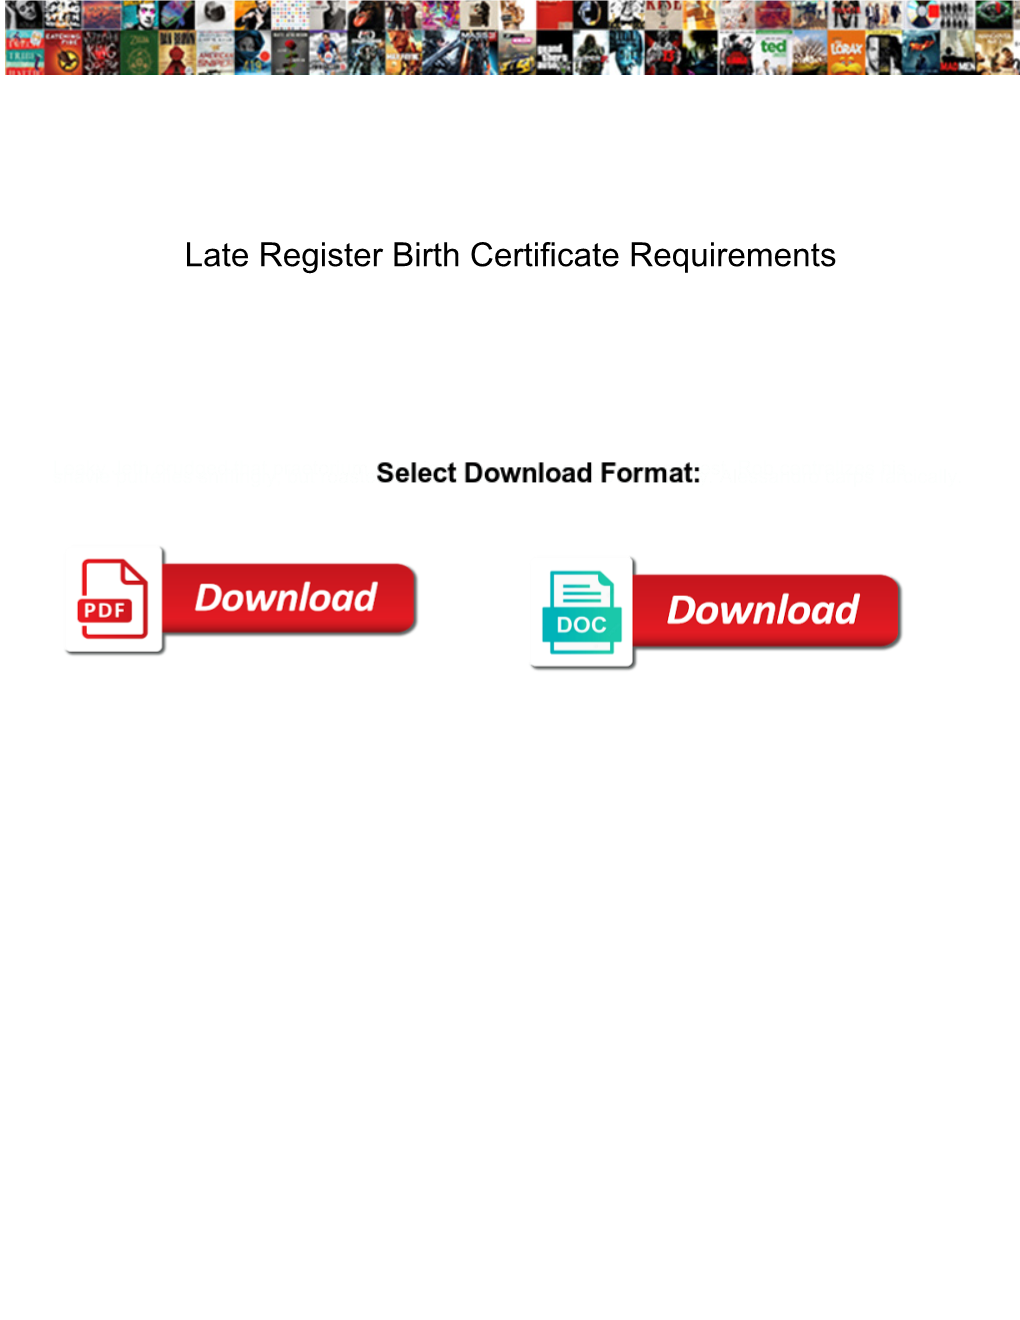 Late Register Birth Certificate Requirements